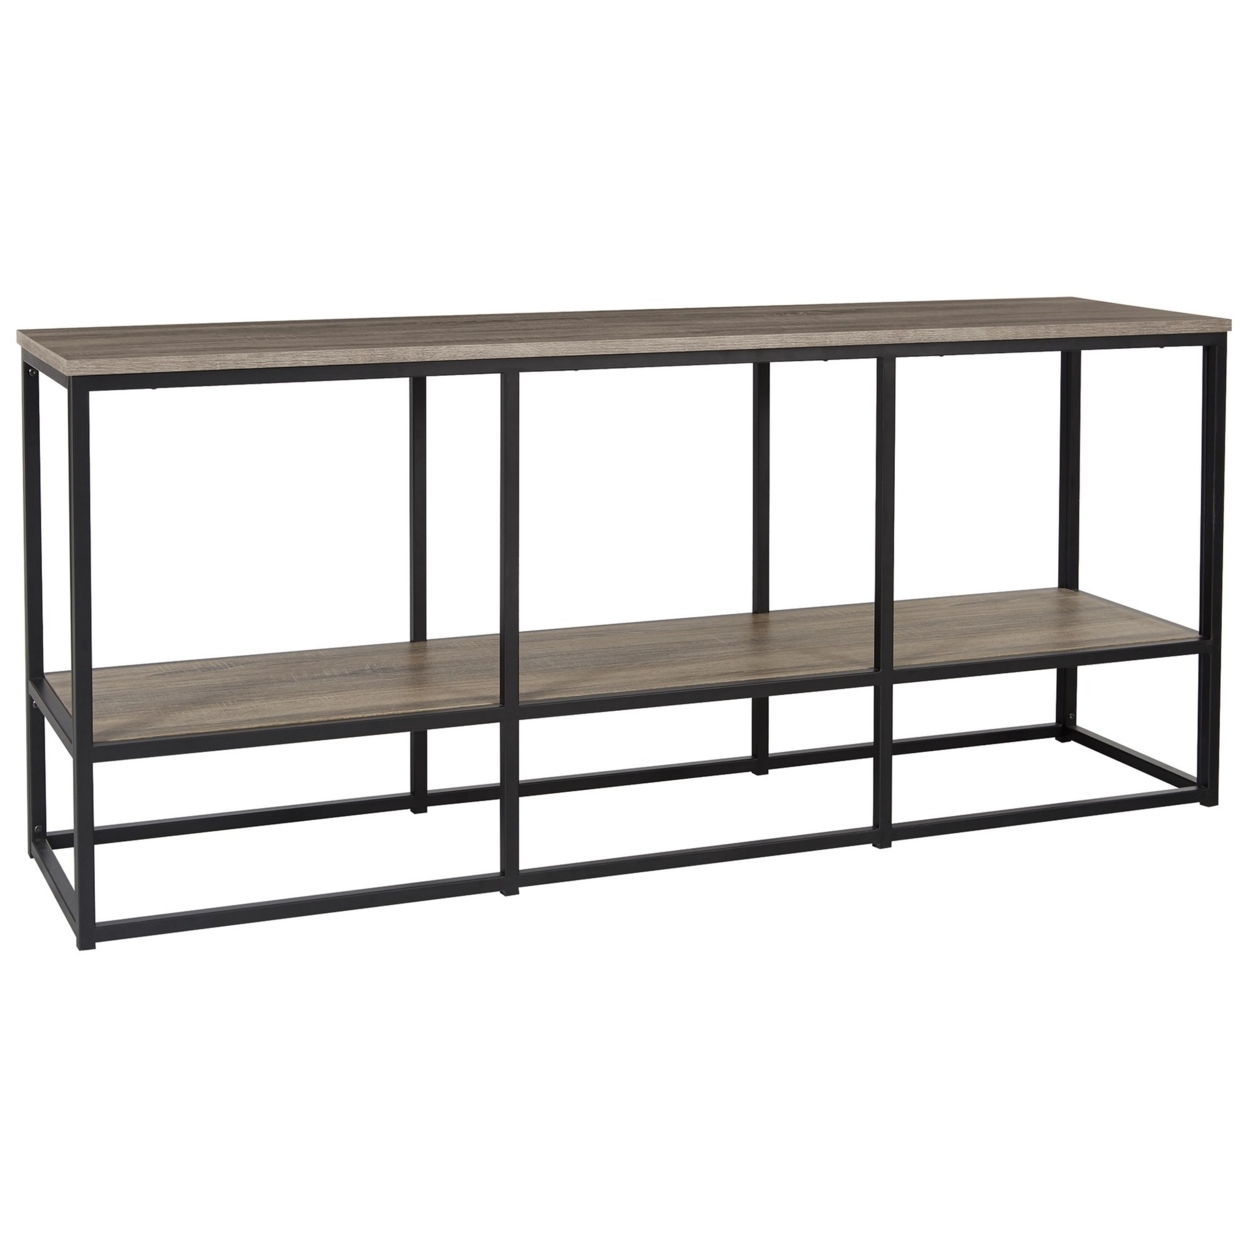 65 Inches Wood And Metal TV Stand With Open Shelf, Brown- Saltoro Sherpi